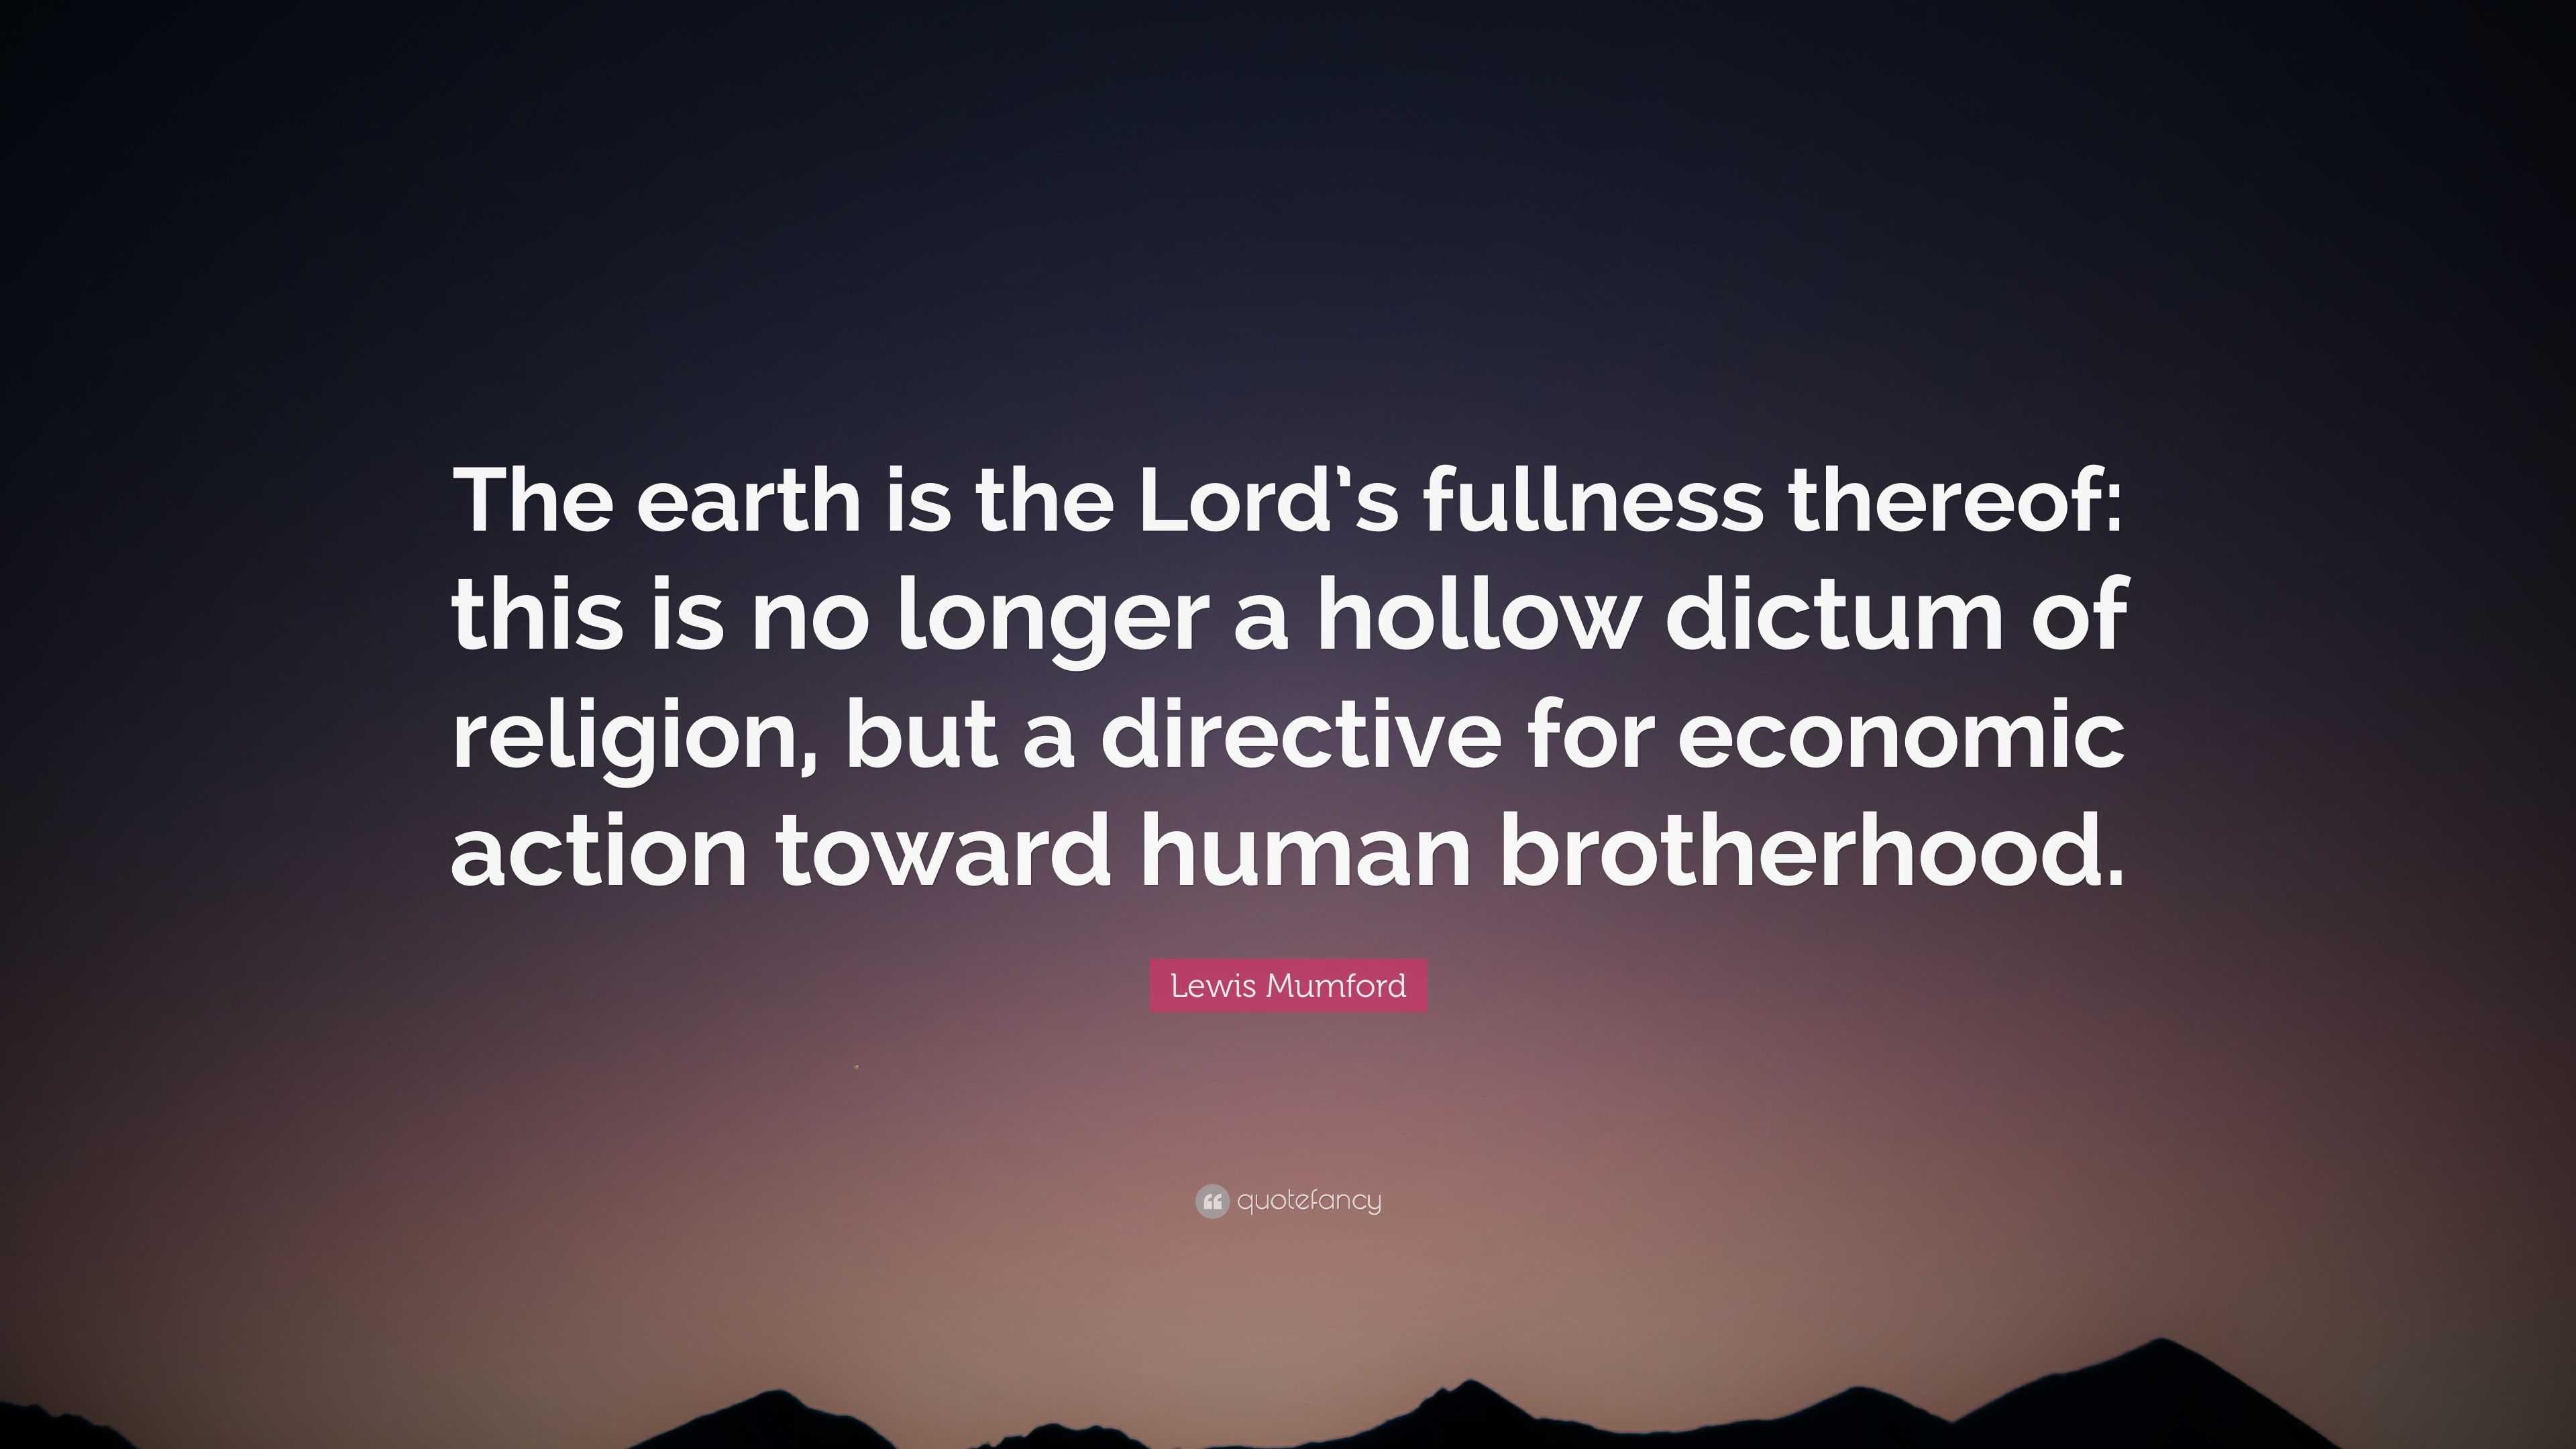 Lewis Mumford Quote: “The earth is the Lord’s fullness thereof: this is ...